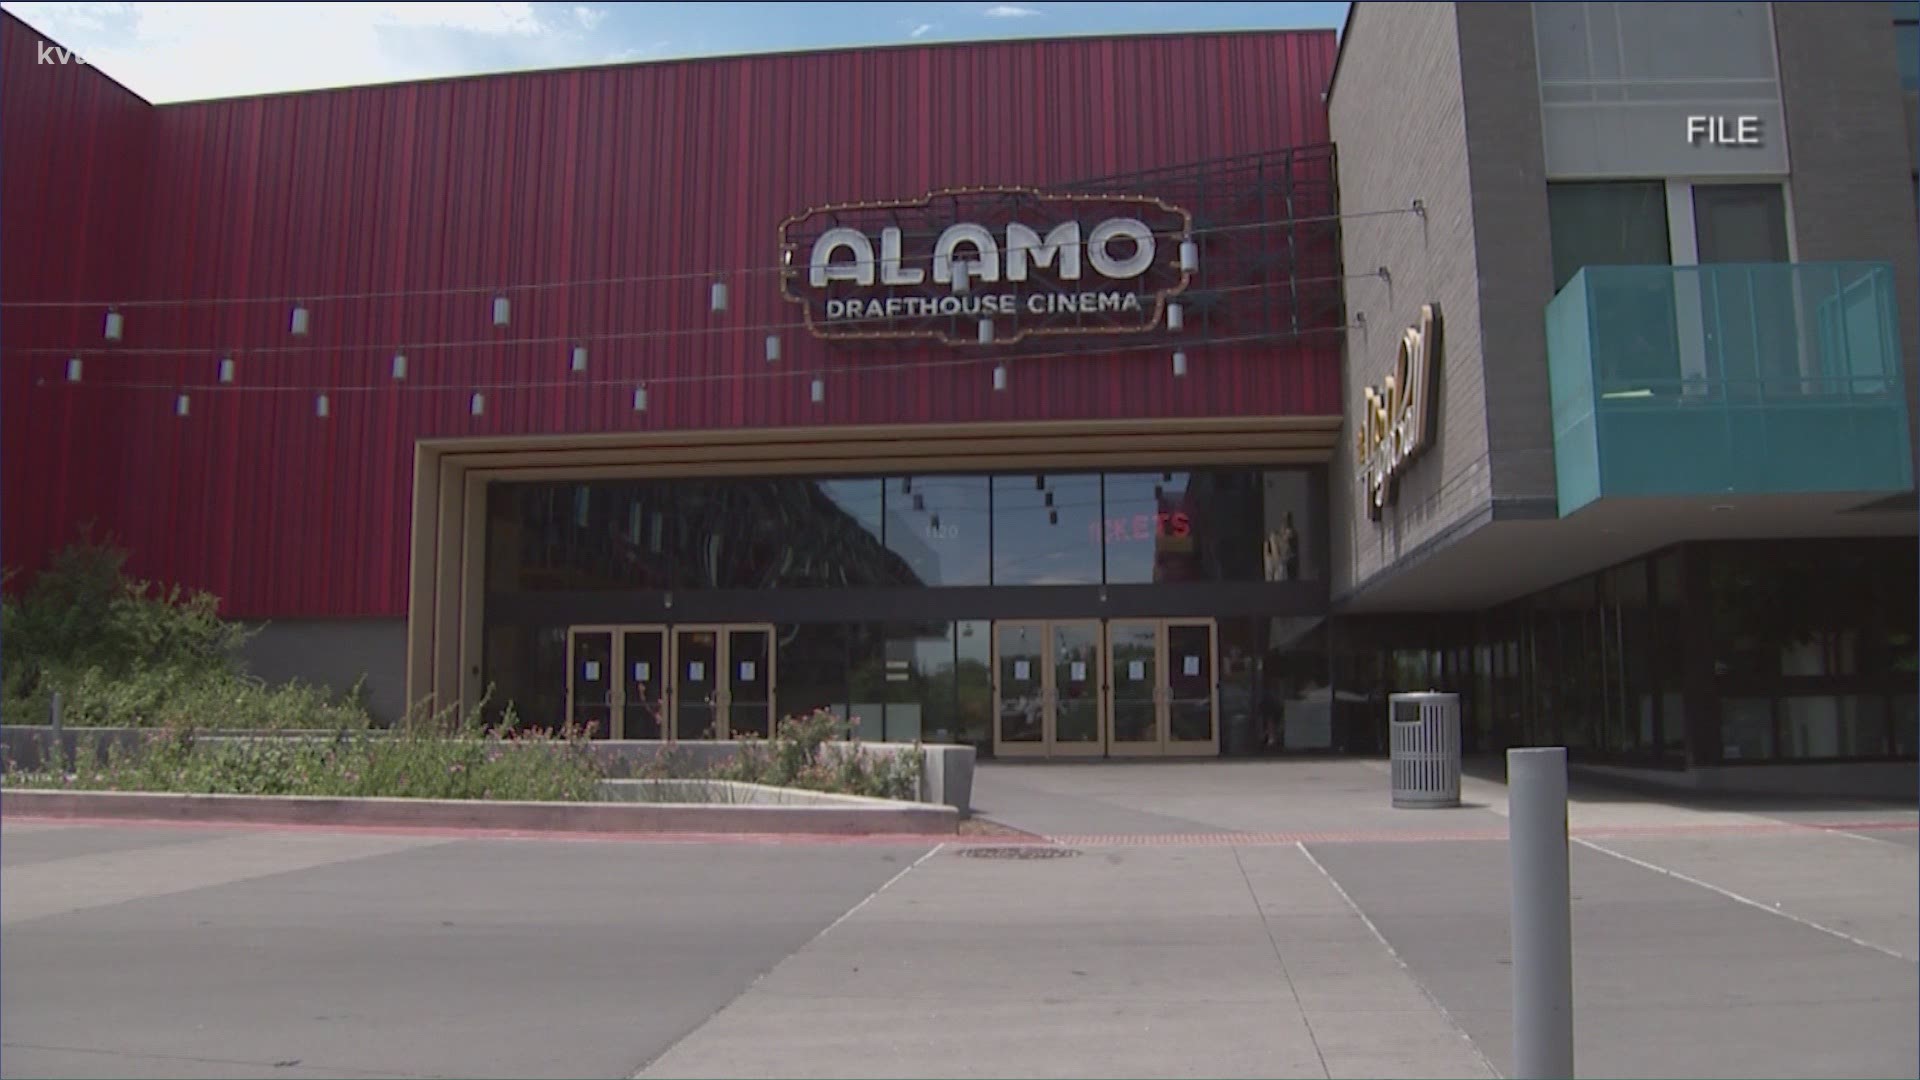 Austin-based Alamo Drafthouse says it's emerged from chapter 11 bankruptcy with a sale to its partners. The movie chain is now planning to expand.